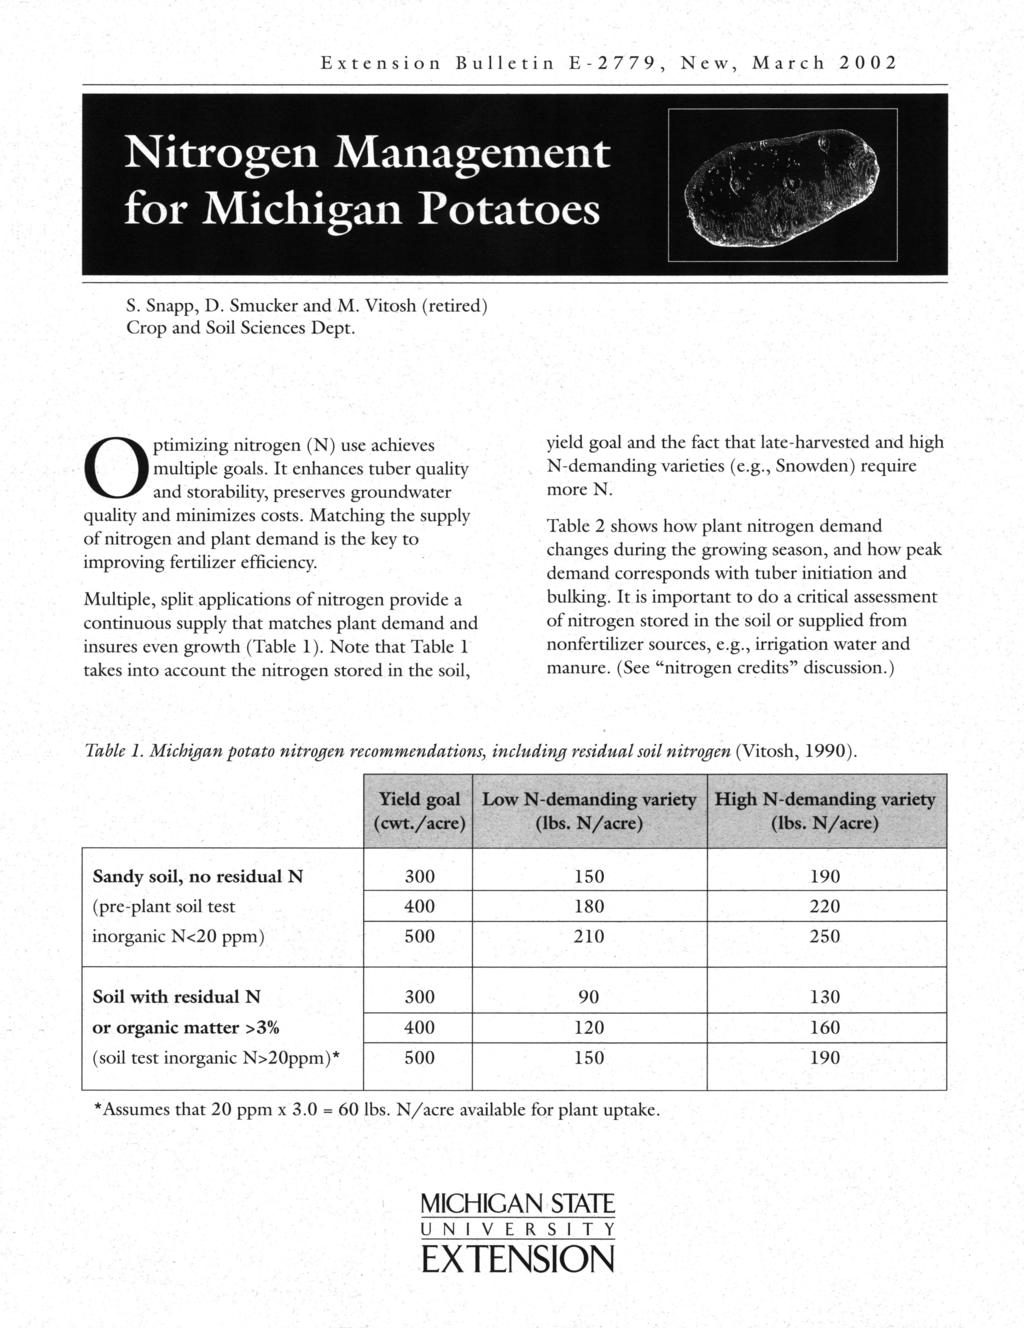 Extensin Bulletin E-2779, Nitrgen Management fr Michigan Ptates New, March «-ras3s 2002 ' ' ^^^hft S. Snapp, D. Smucker and M. Vitsh (retired) Crp and Sil Sciences Dept.